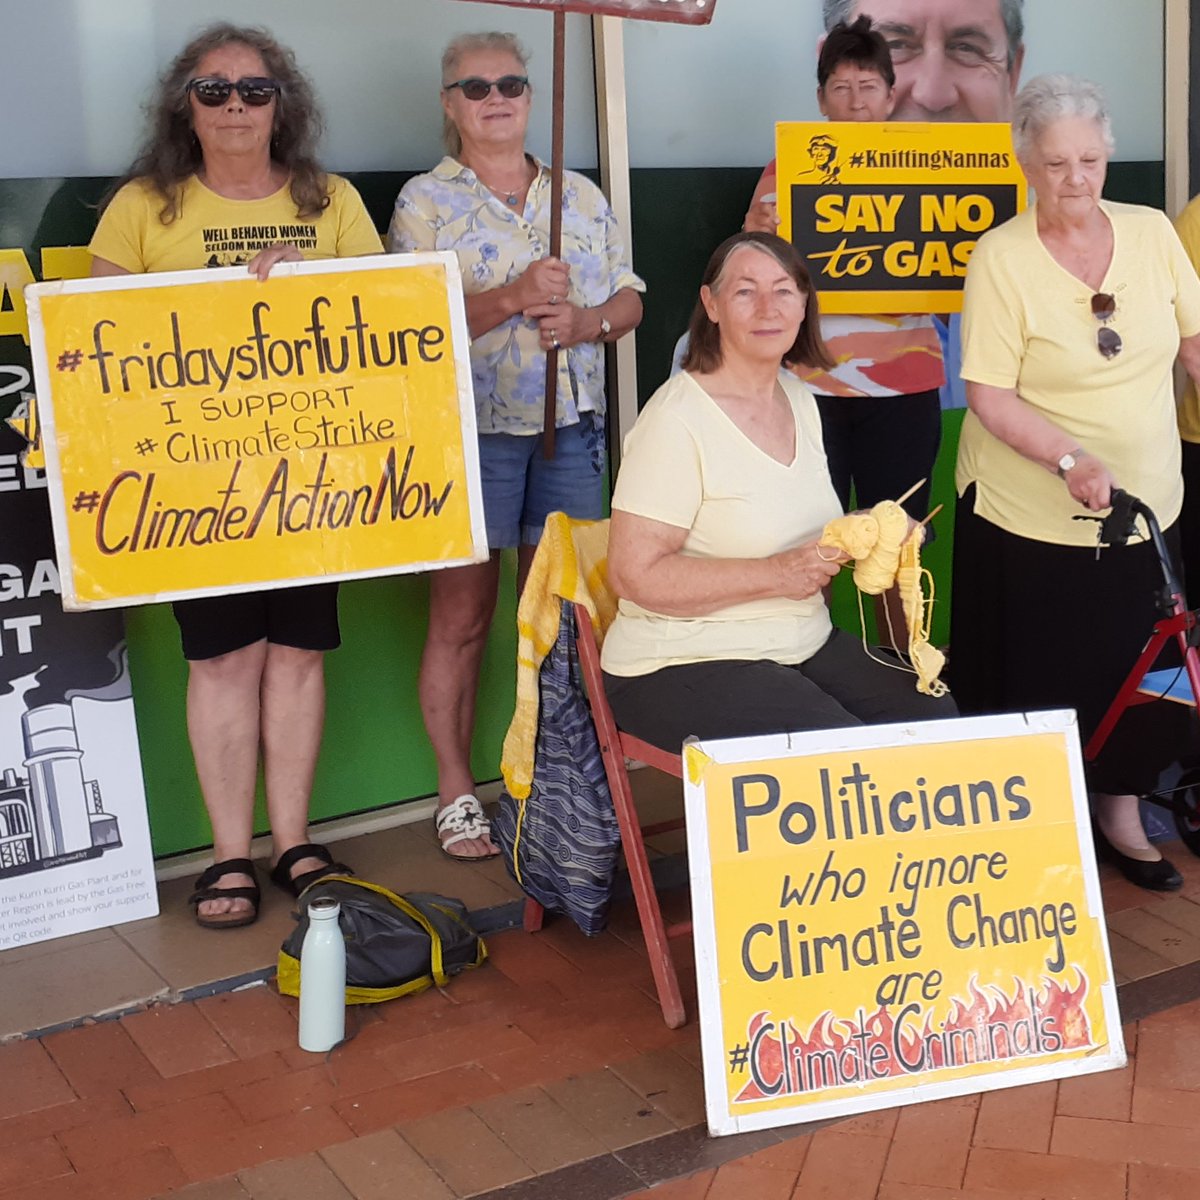 It's #FridaysforFuture & #FridaysforForests, & again we remind our local Fed MP he has to #ActOnClimate 
There is no doubt we are living through the #ClimateCrisis, & they, the Morrison Gov, act with NO #DutyofCare to our children & their future.
#VoteThemOut
#ClimateCriminals